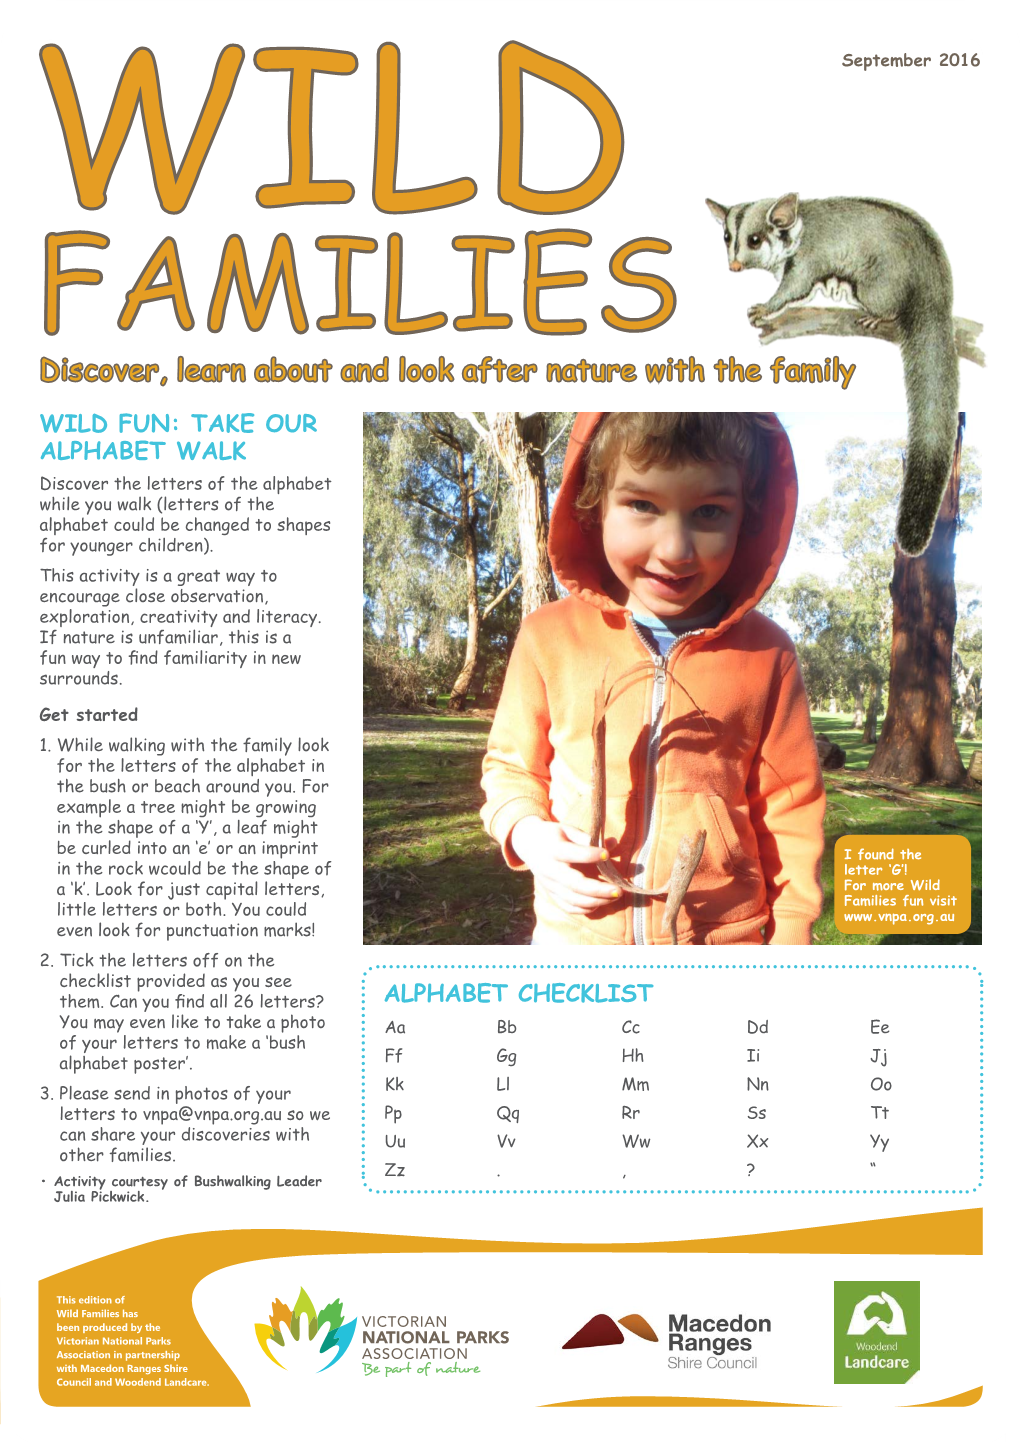 Discover, Learn About and Look After Nature with the Family